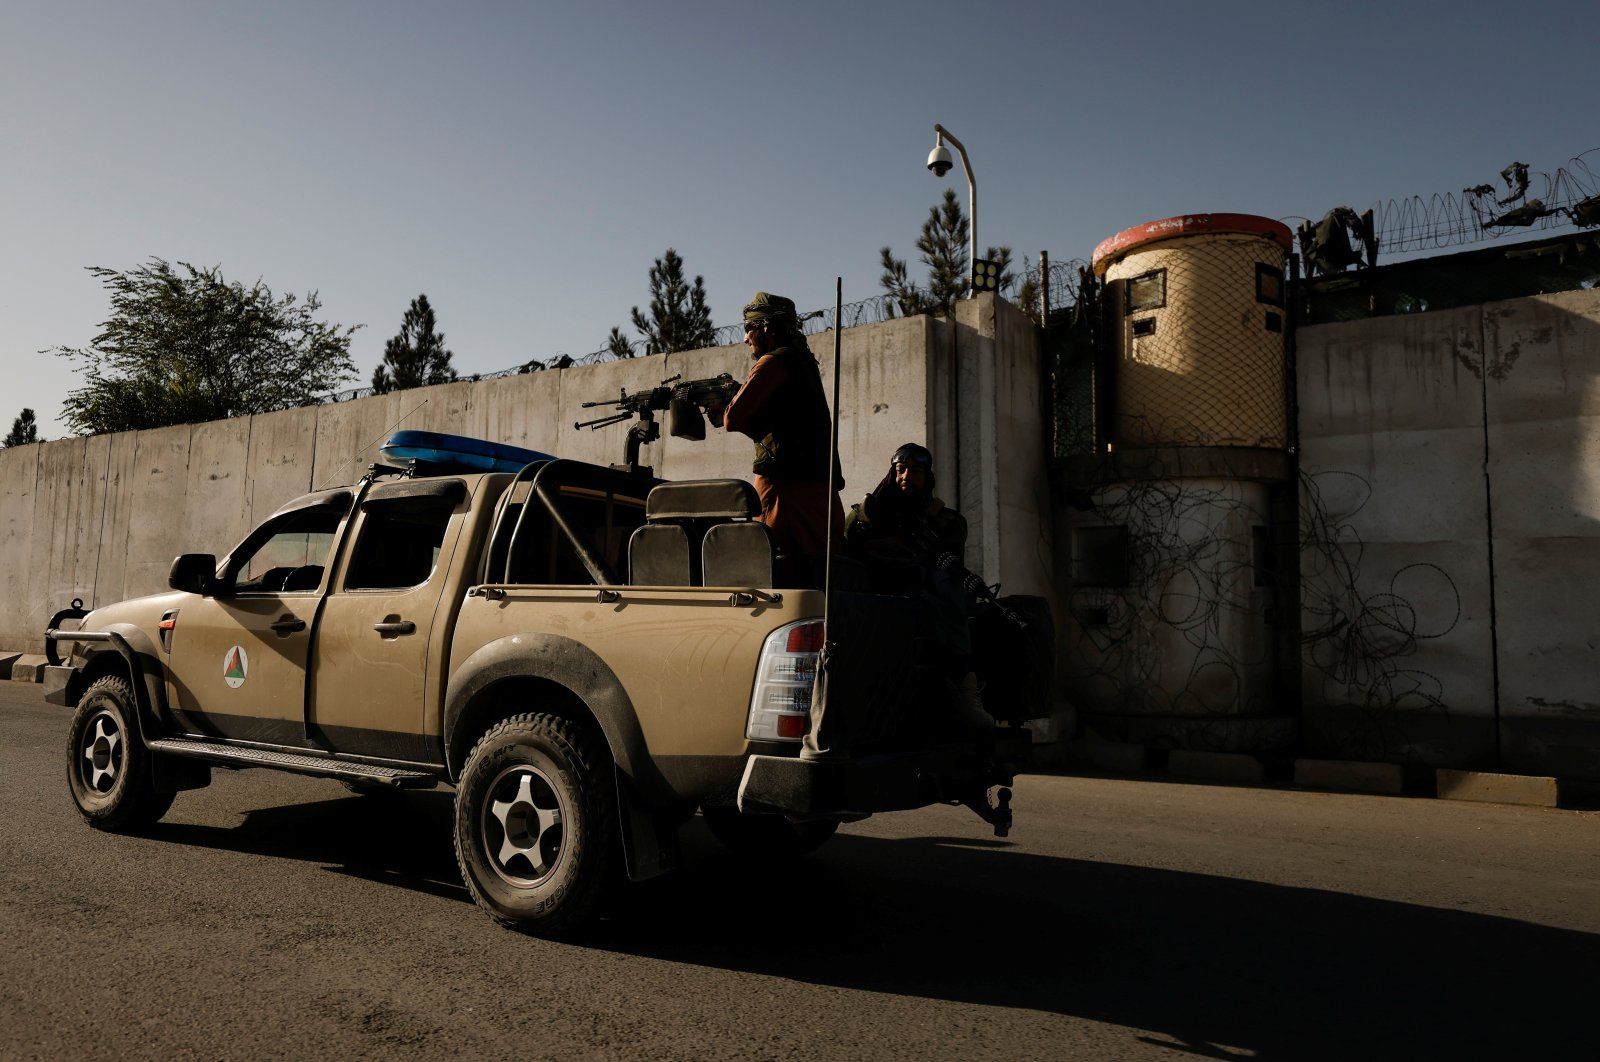 Taliban fighters ride on the back of a pickup truck as they patrol along a road in Kabul, Afghanistan, Oct. 23, 2021. (Reuters Photo)